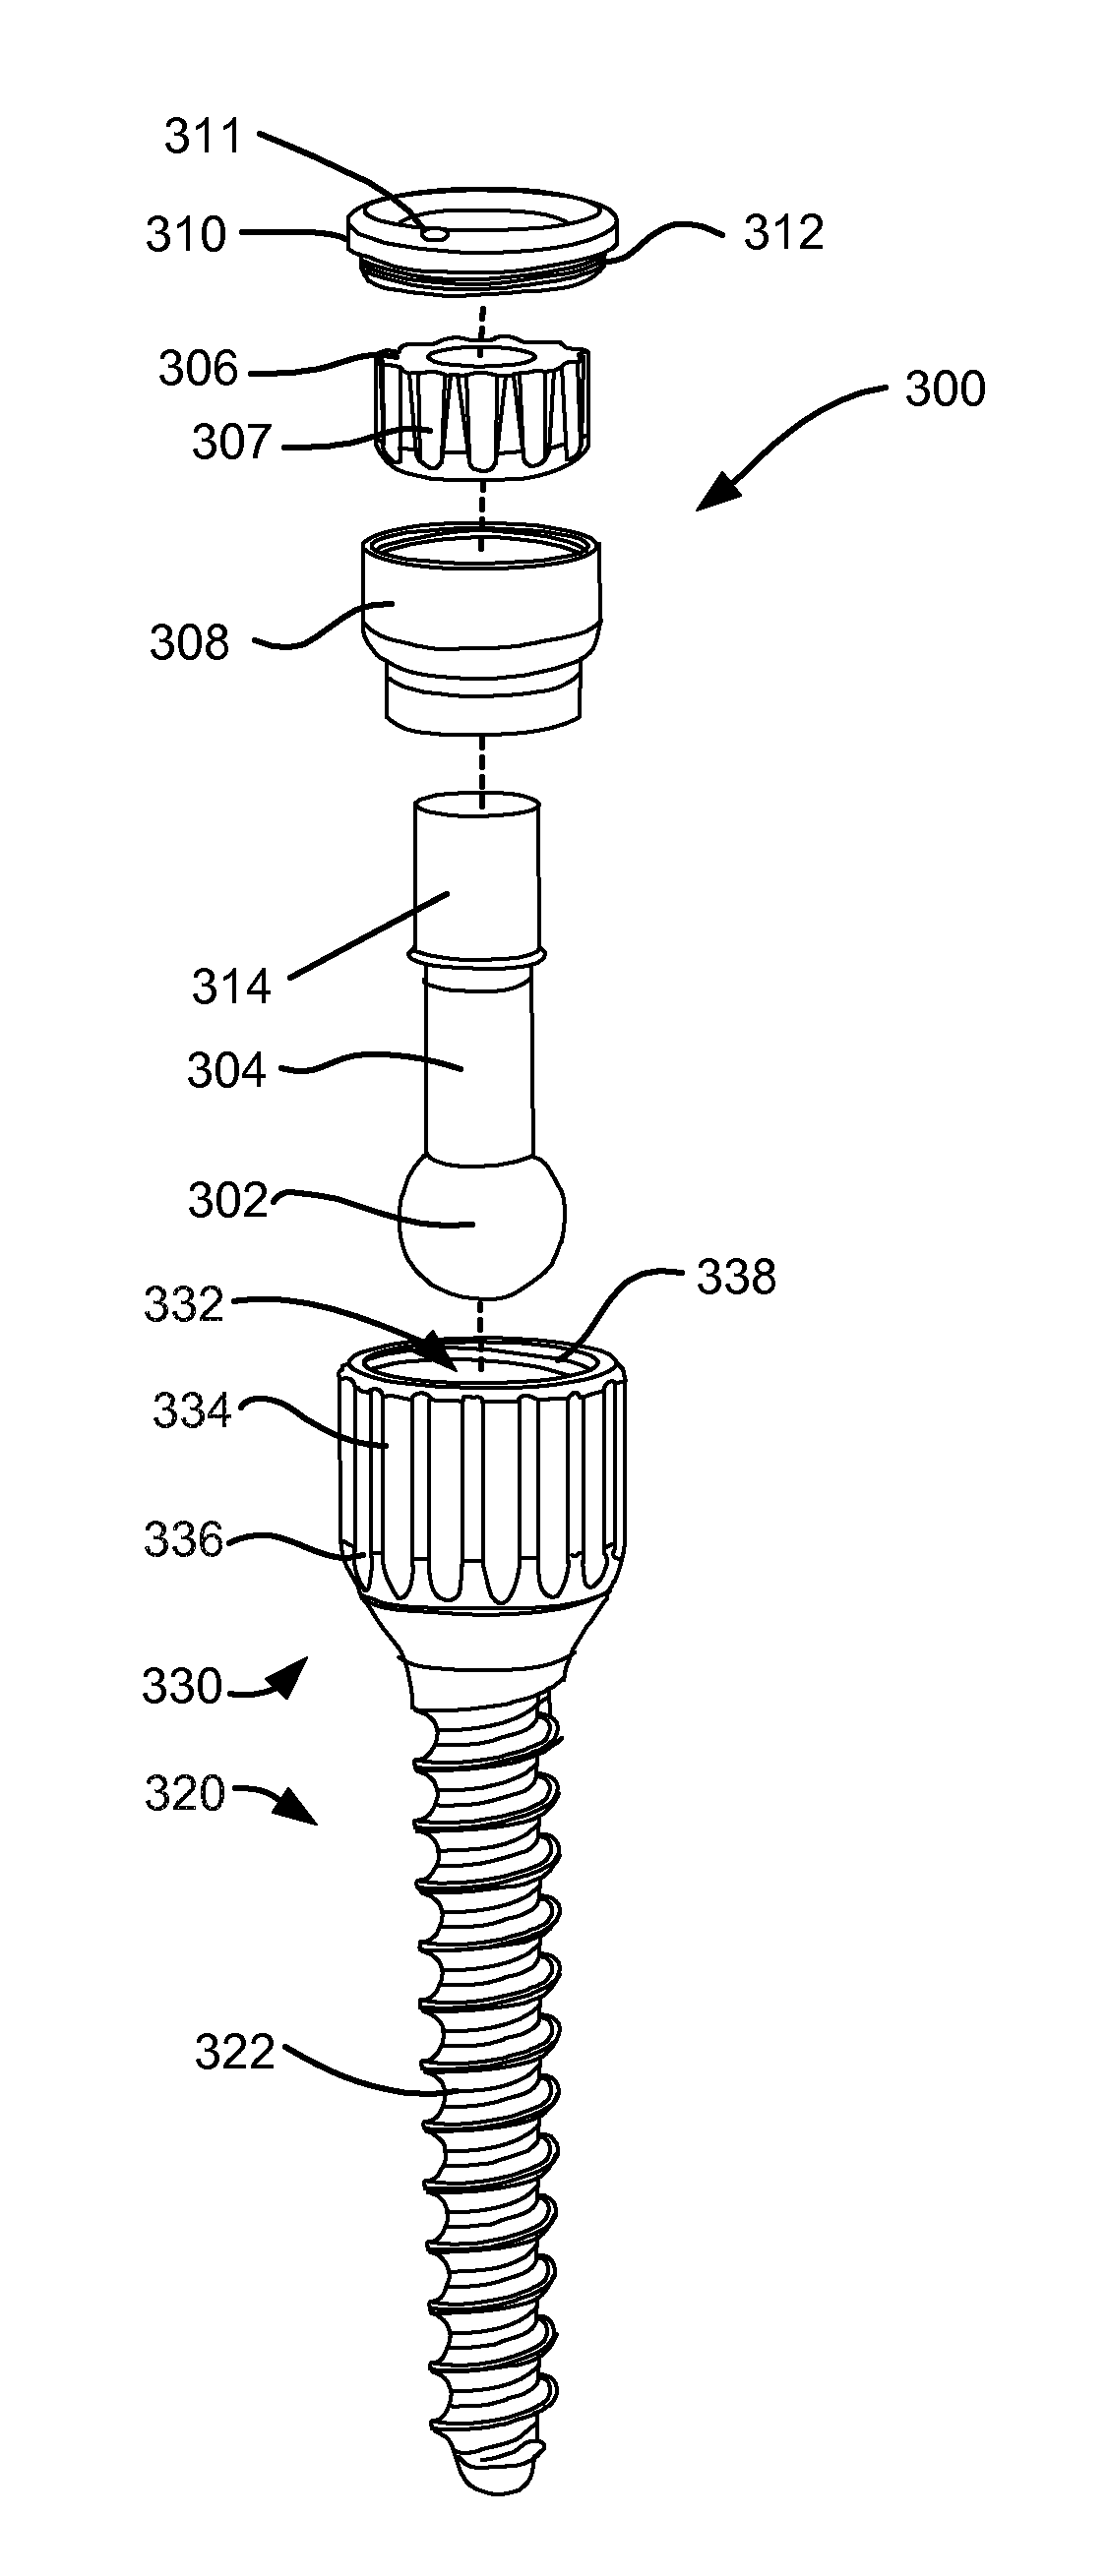 Load-sharing bone anchor having a deflectable post and method for dynamic stabilization of the spine